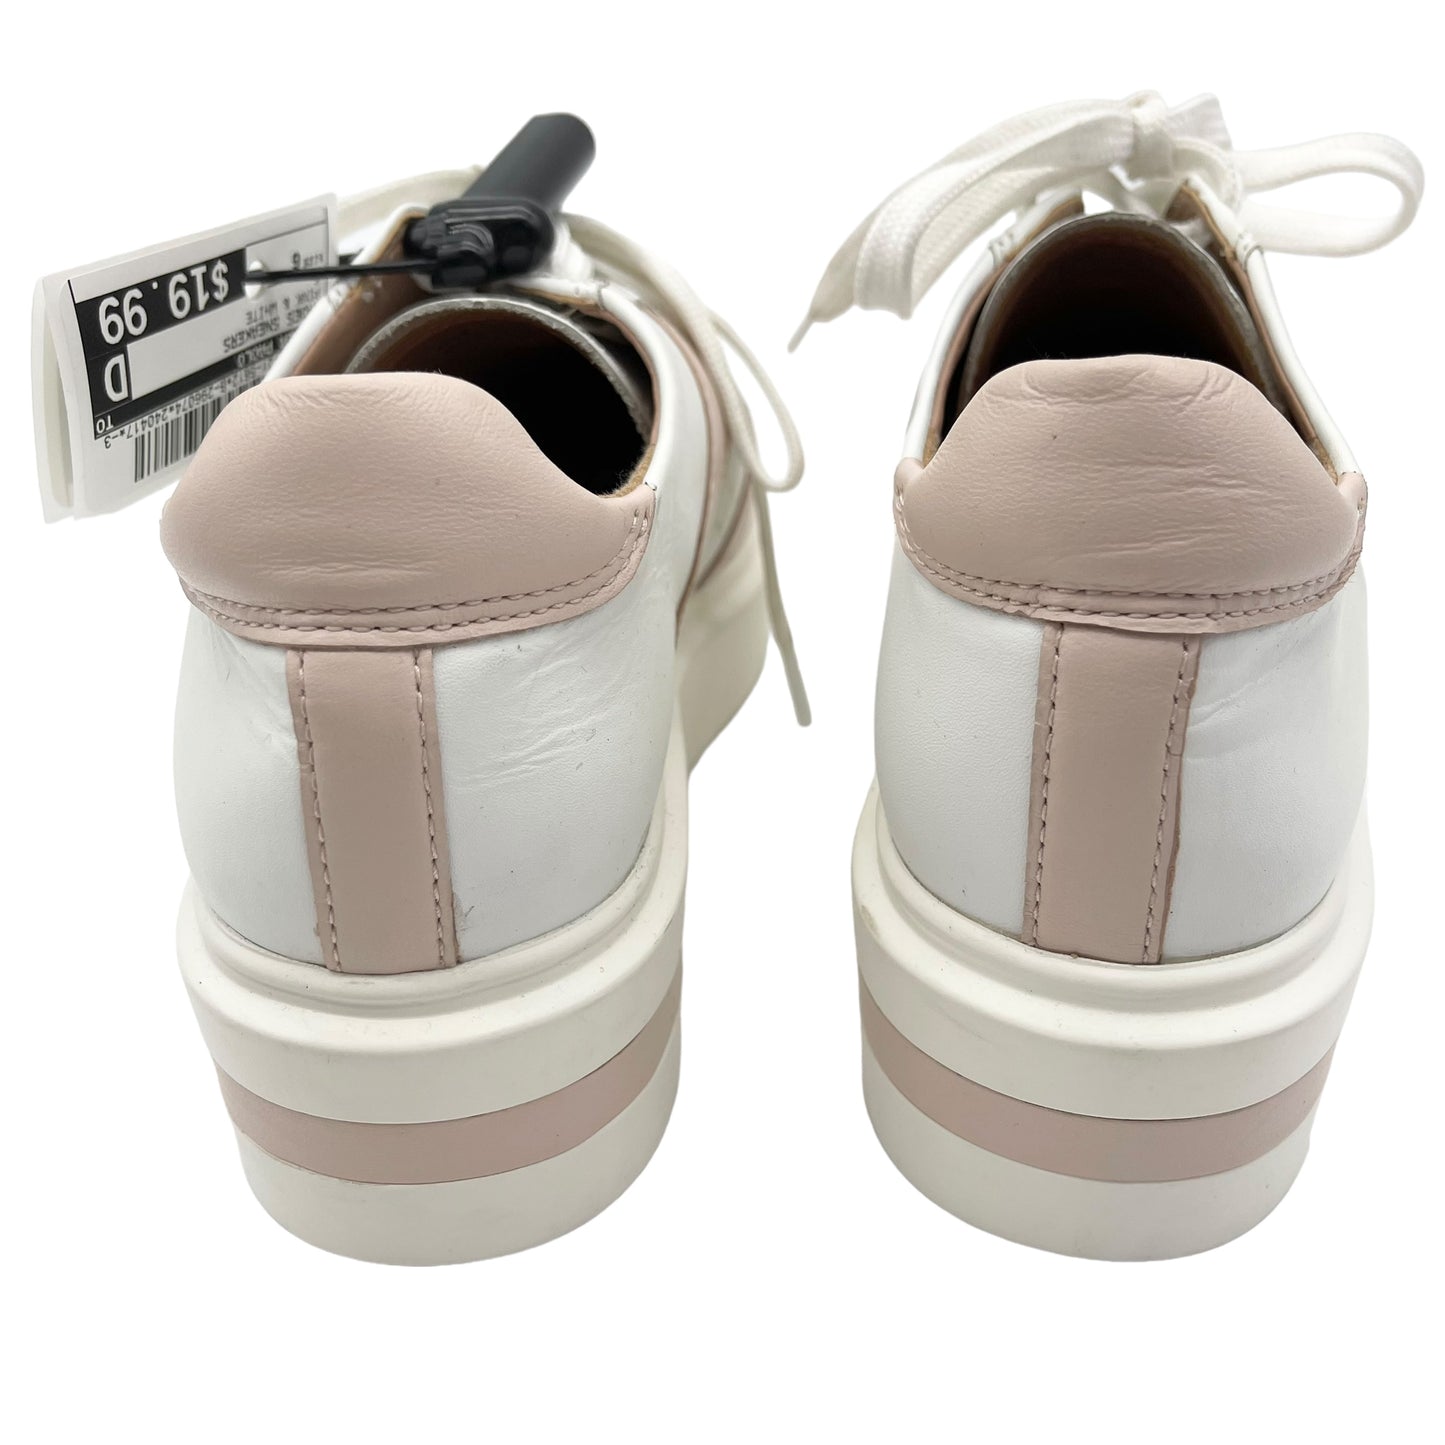 Shoes Sneakers By Linea Paolo  Size: 6